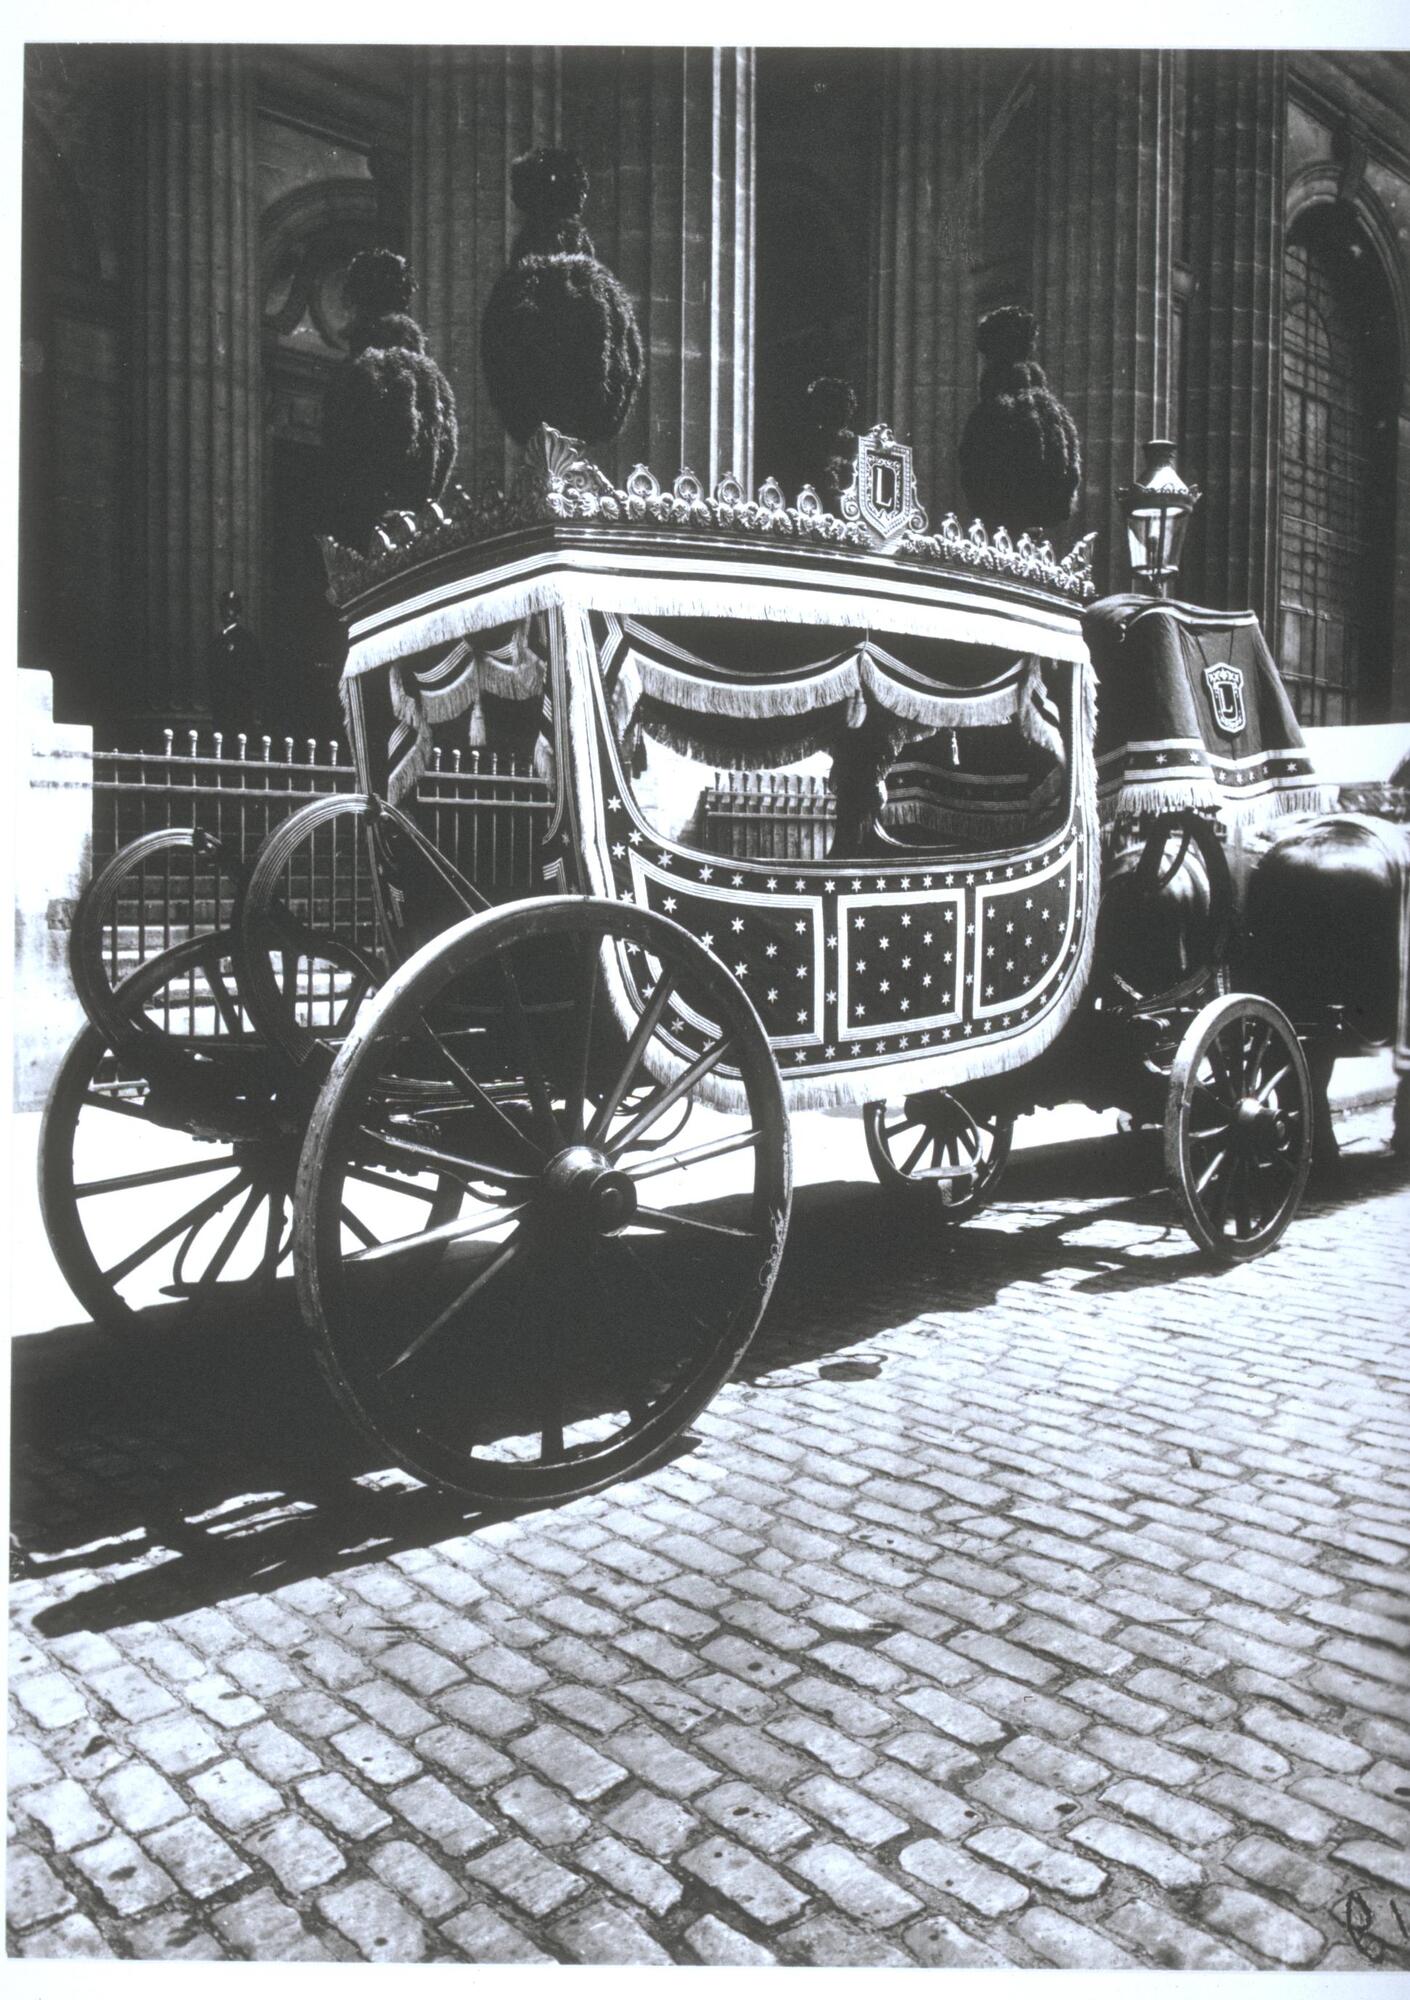 Horse-drawn funeral carriage parked on the side of a cobble-stone paved street.